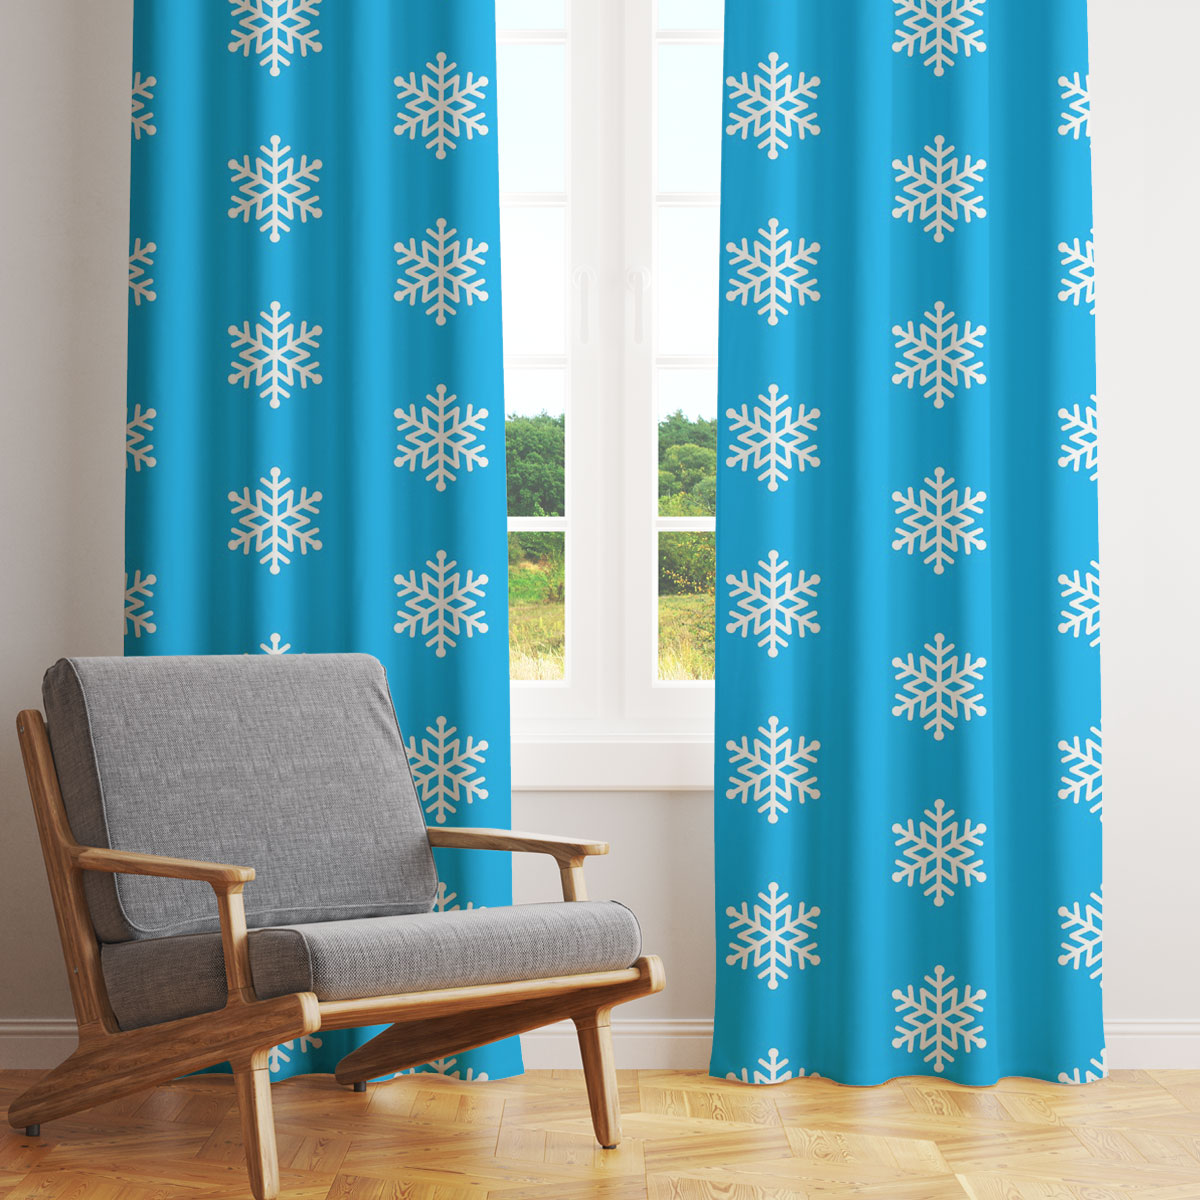 Christmas Snowflake Clipart On The Blue Background Window Curtain